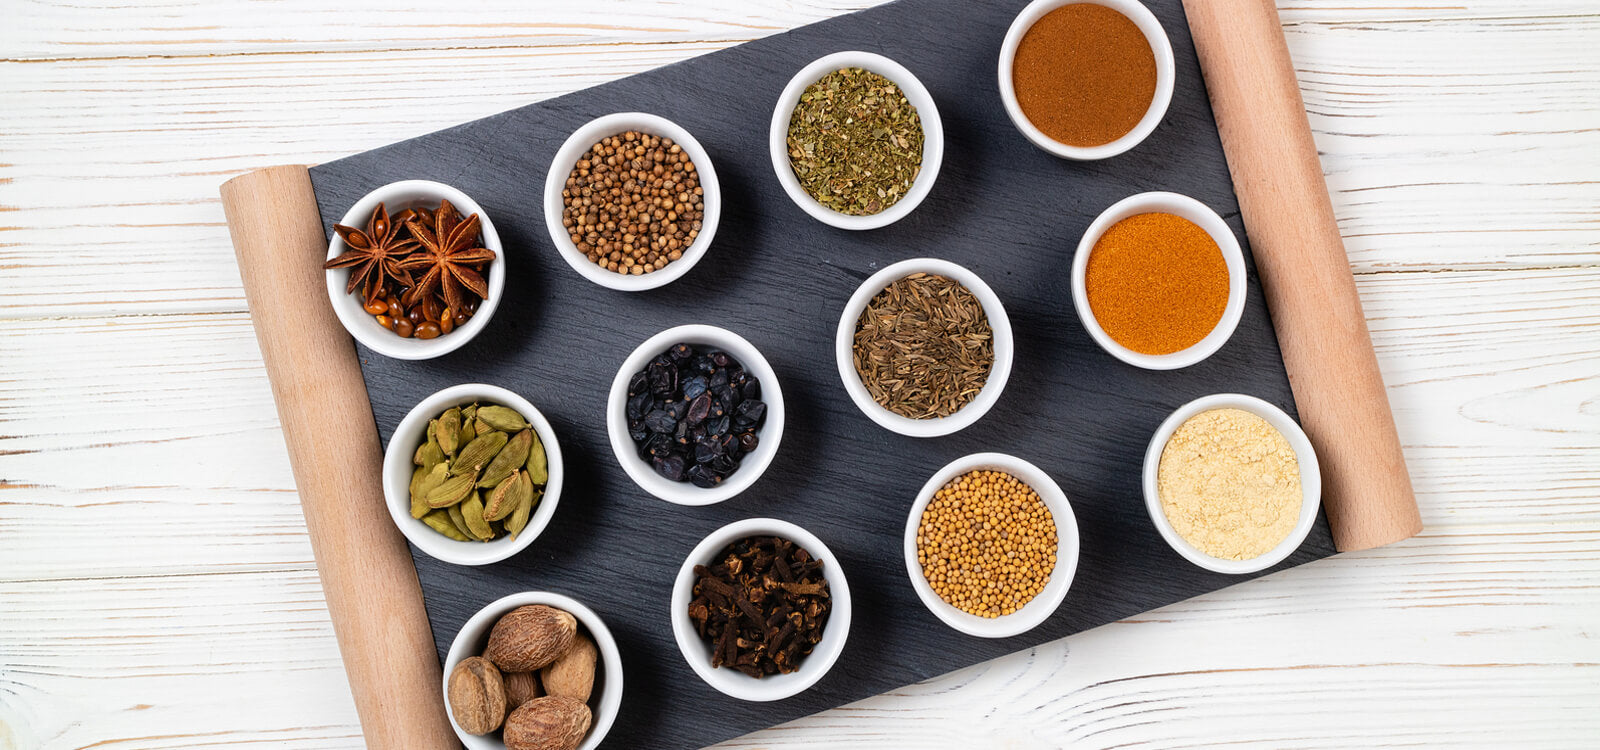 various spices as ayurvedic medicine for digestion